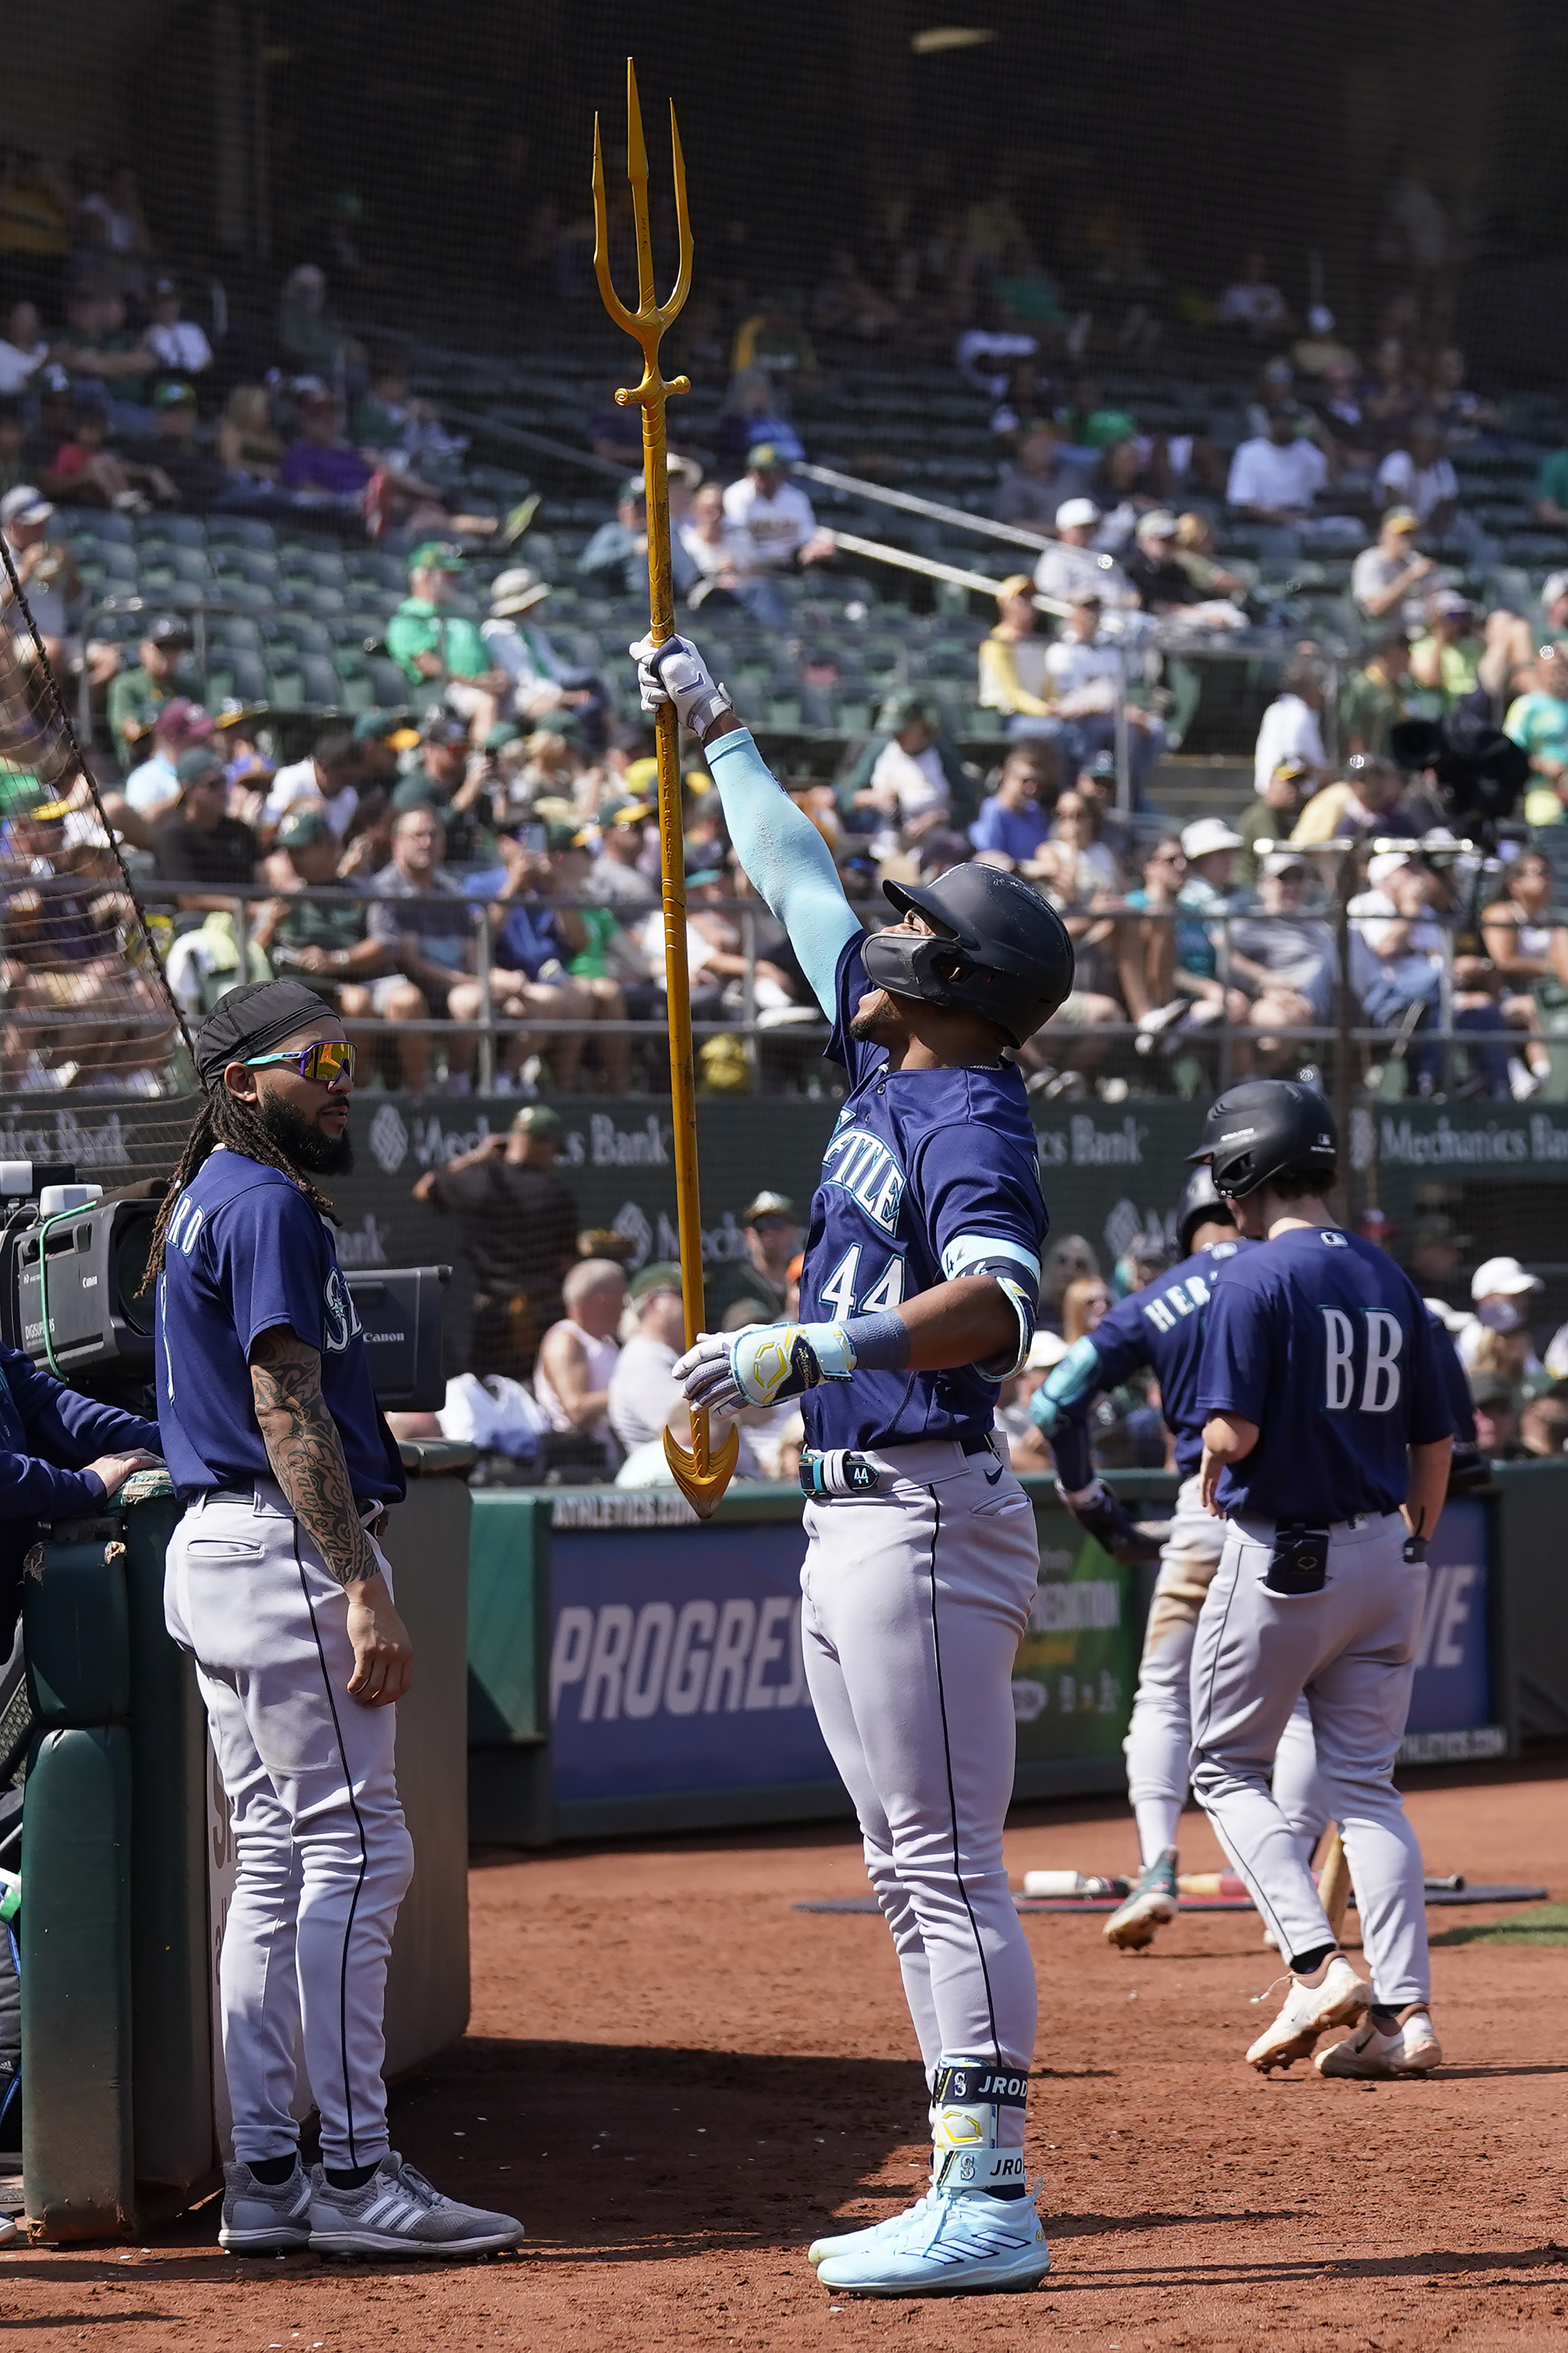 Dominic Canzone homers and drives in 4 runs as the Mariners beat the A's to  keep pace with rivals